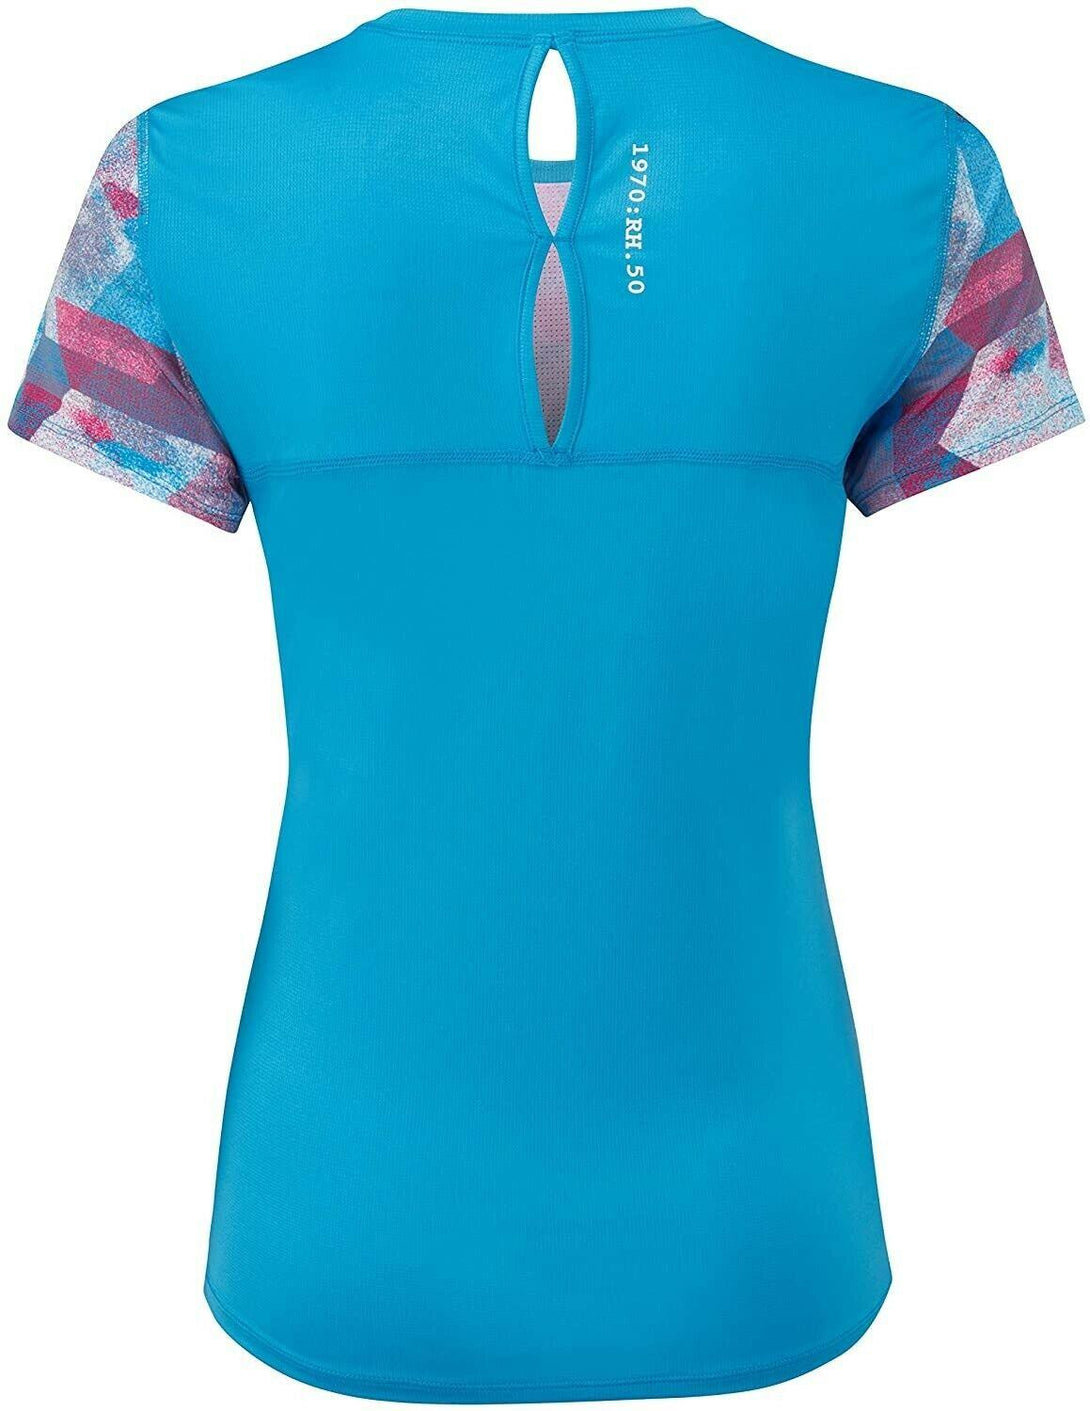 Ronhill Stride Revive S/S Tee Women's